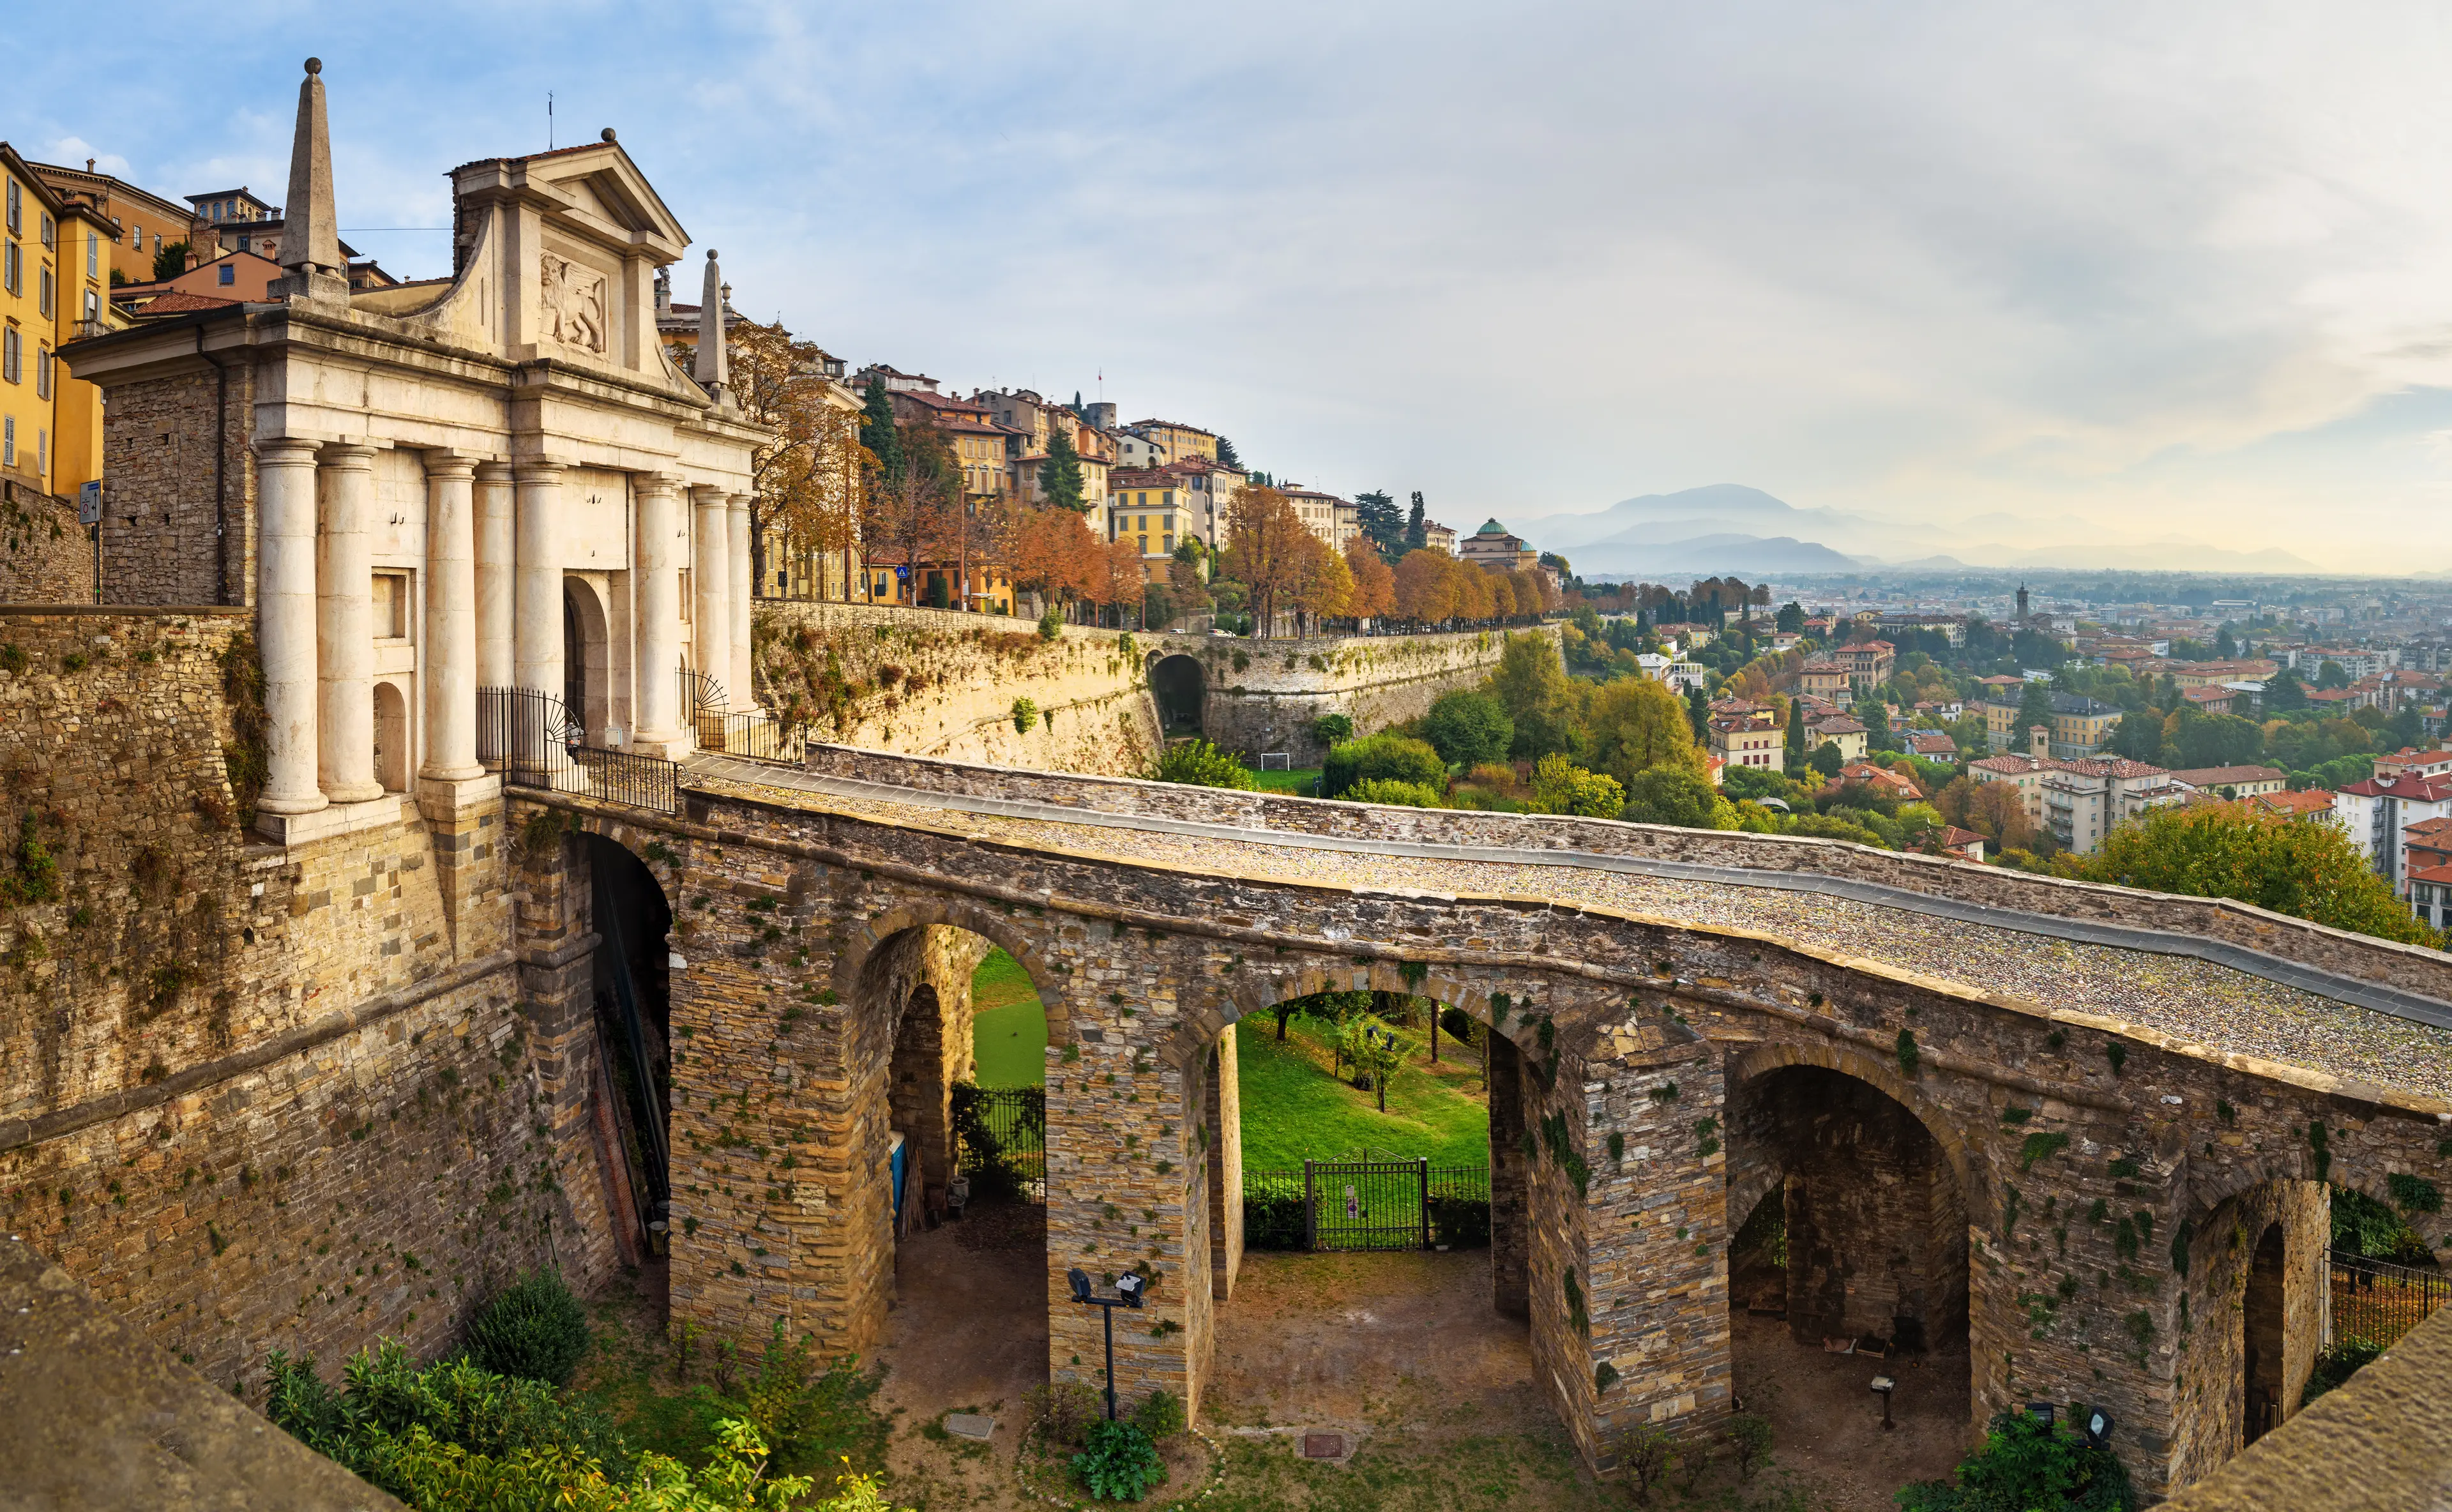 4-Day Family Adventure in Bergamo: Food, Wine, Shopping & Sightseeing